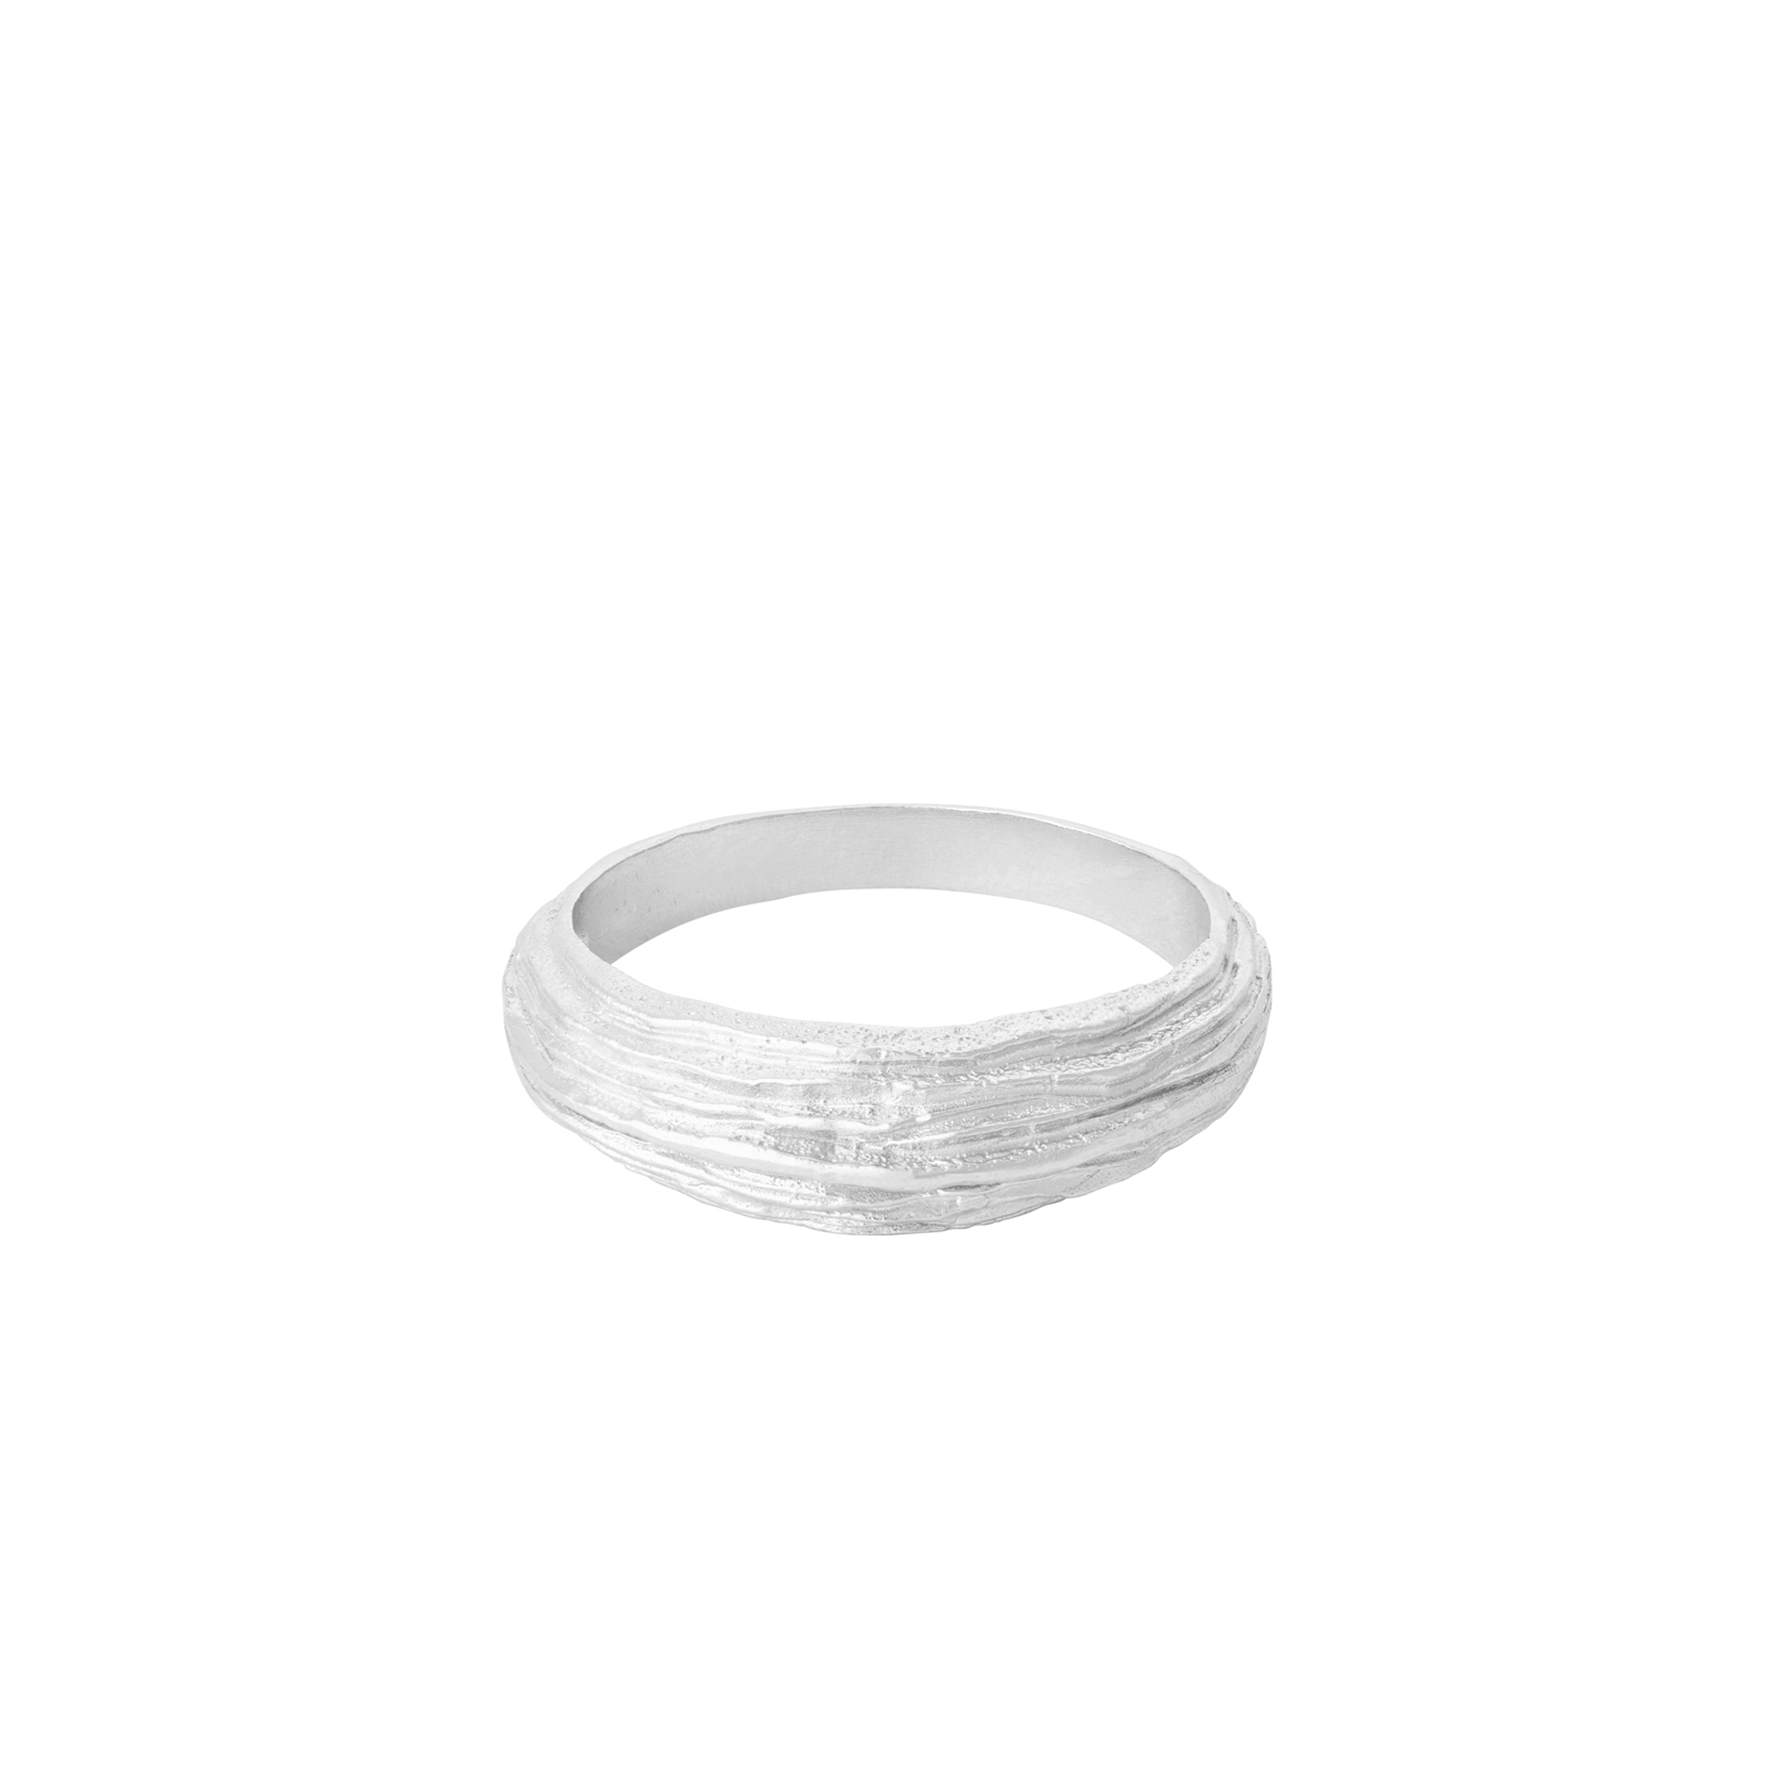 Coastline Ring from Pernille Corydon in Silver Sterling 925